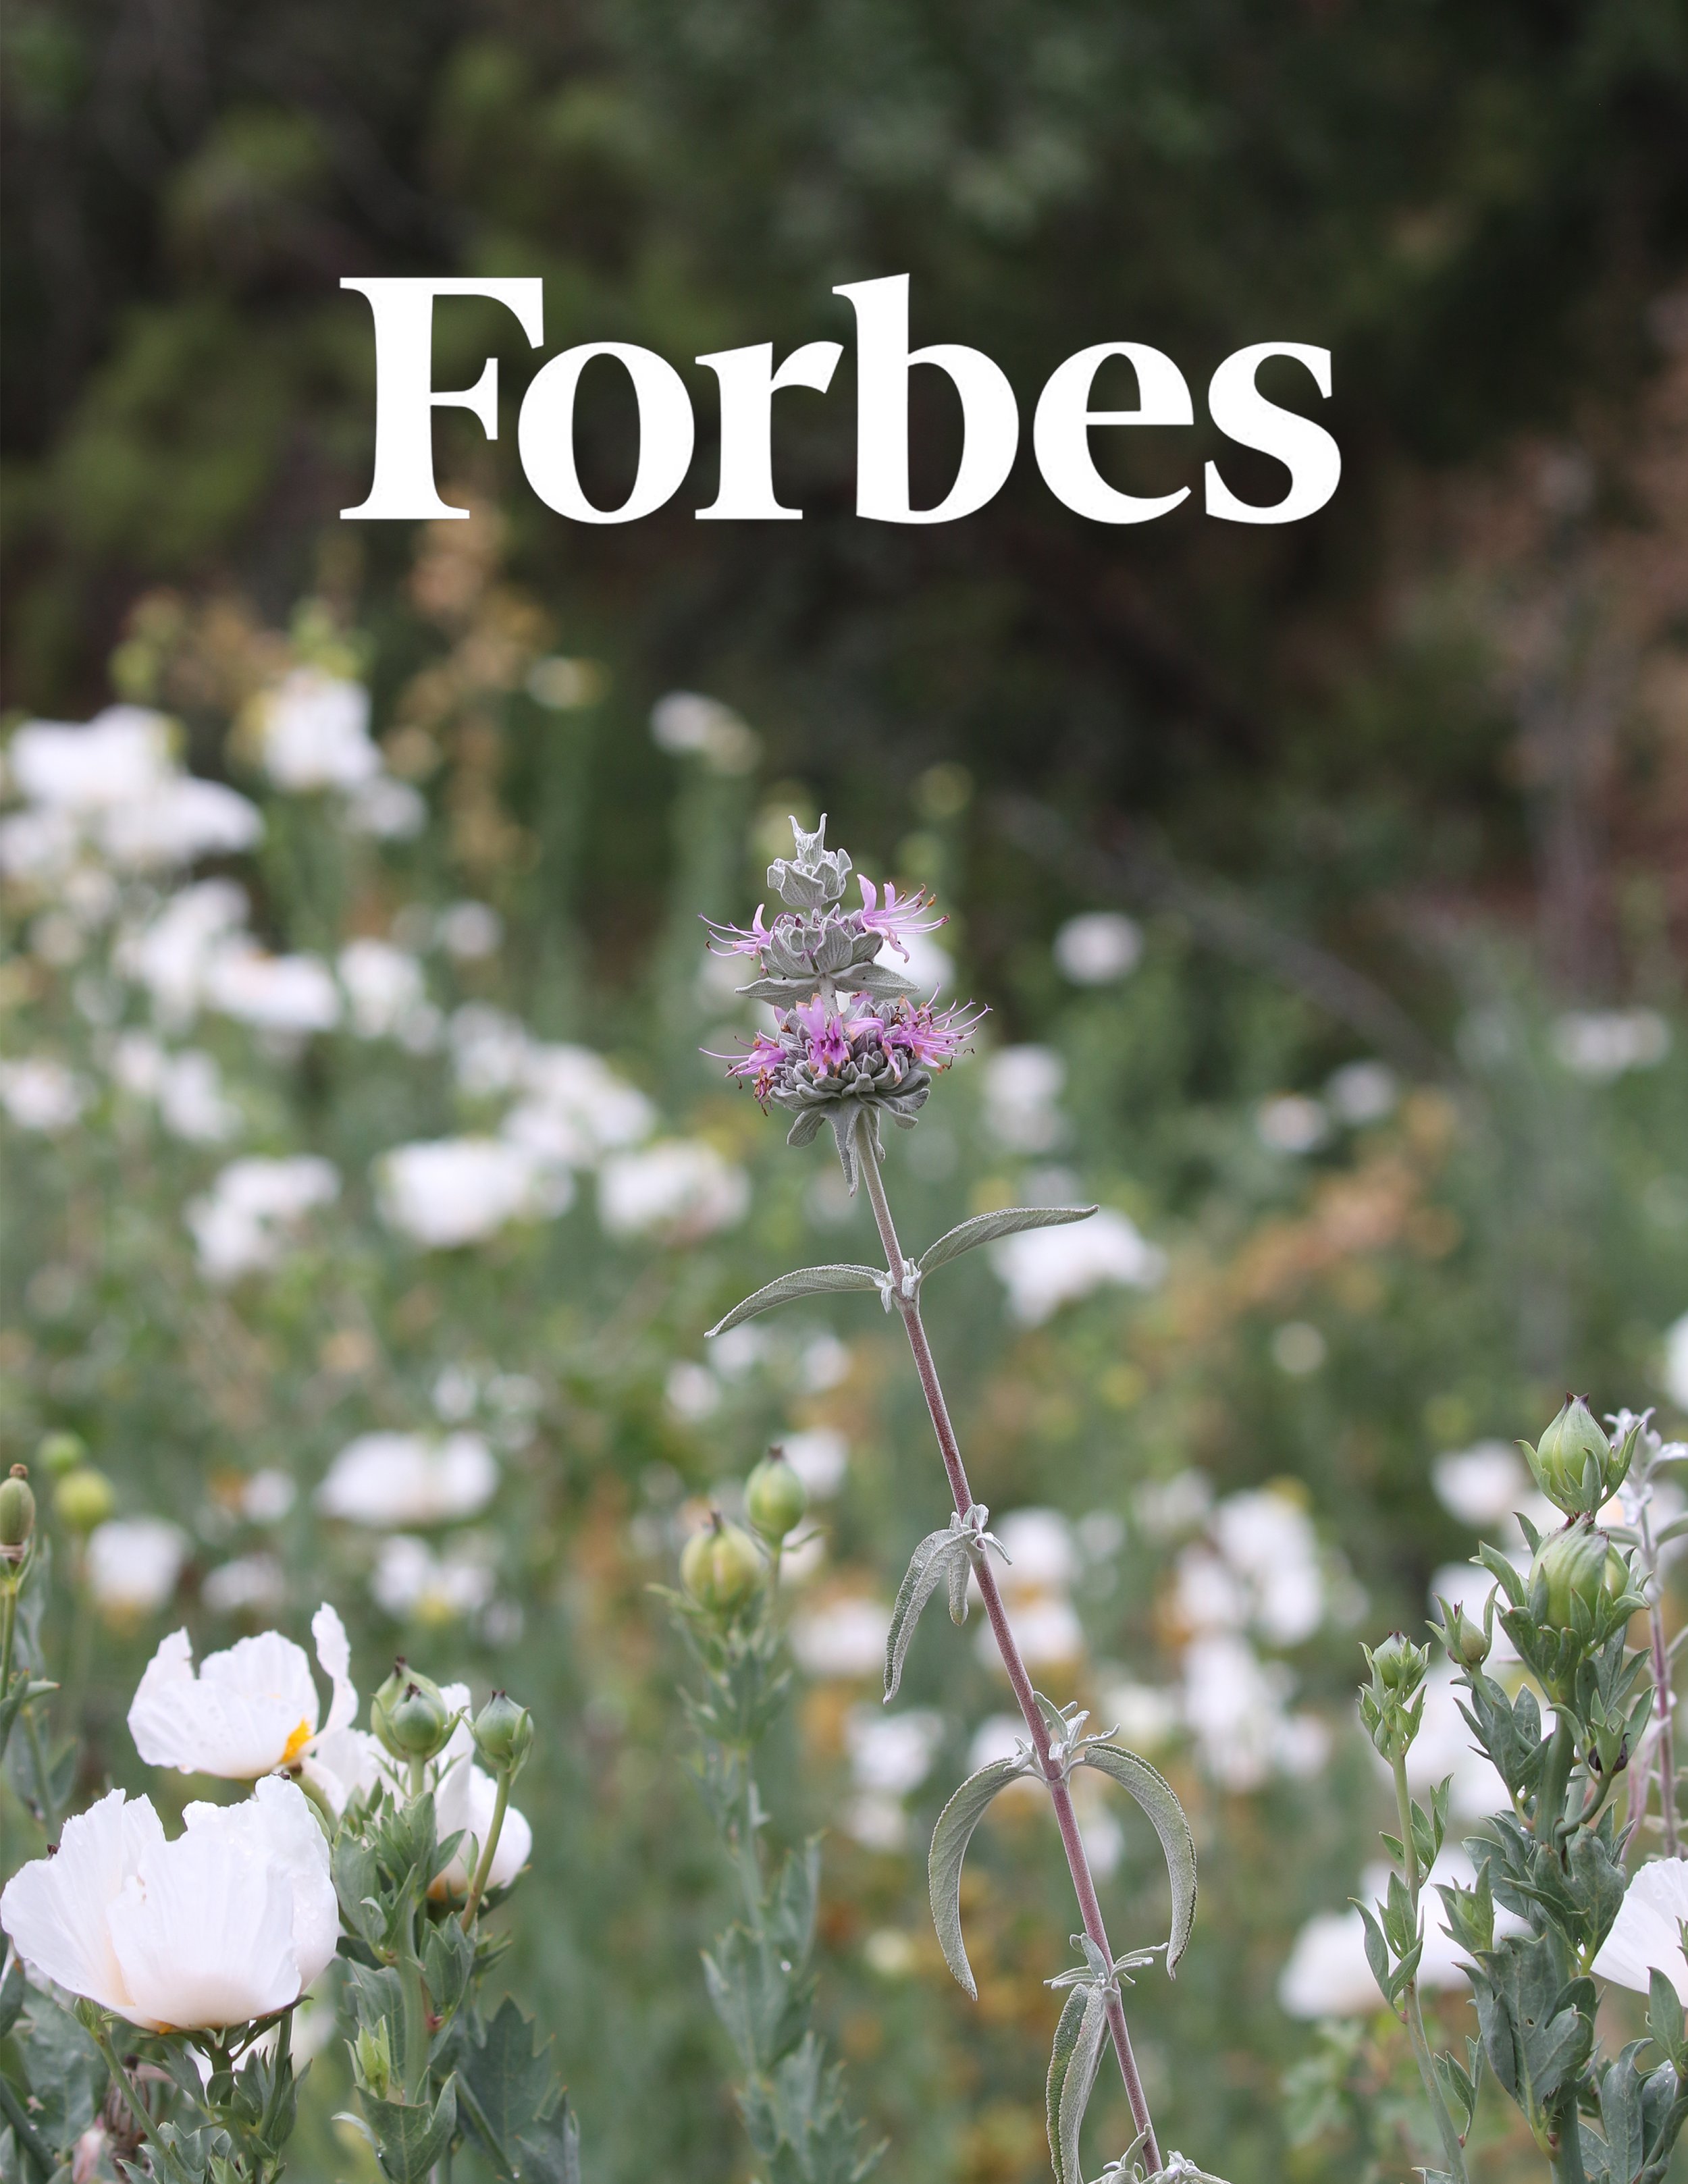  Forbes article featuring quotes from Sarah Barnard on landscaping trends. 